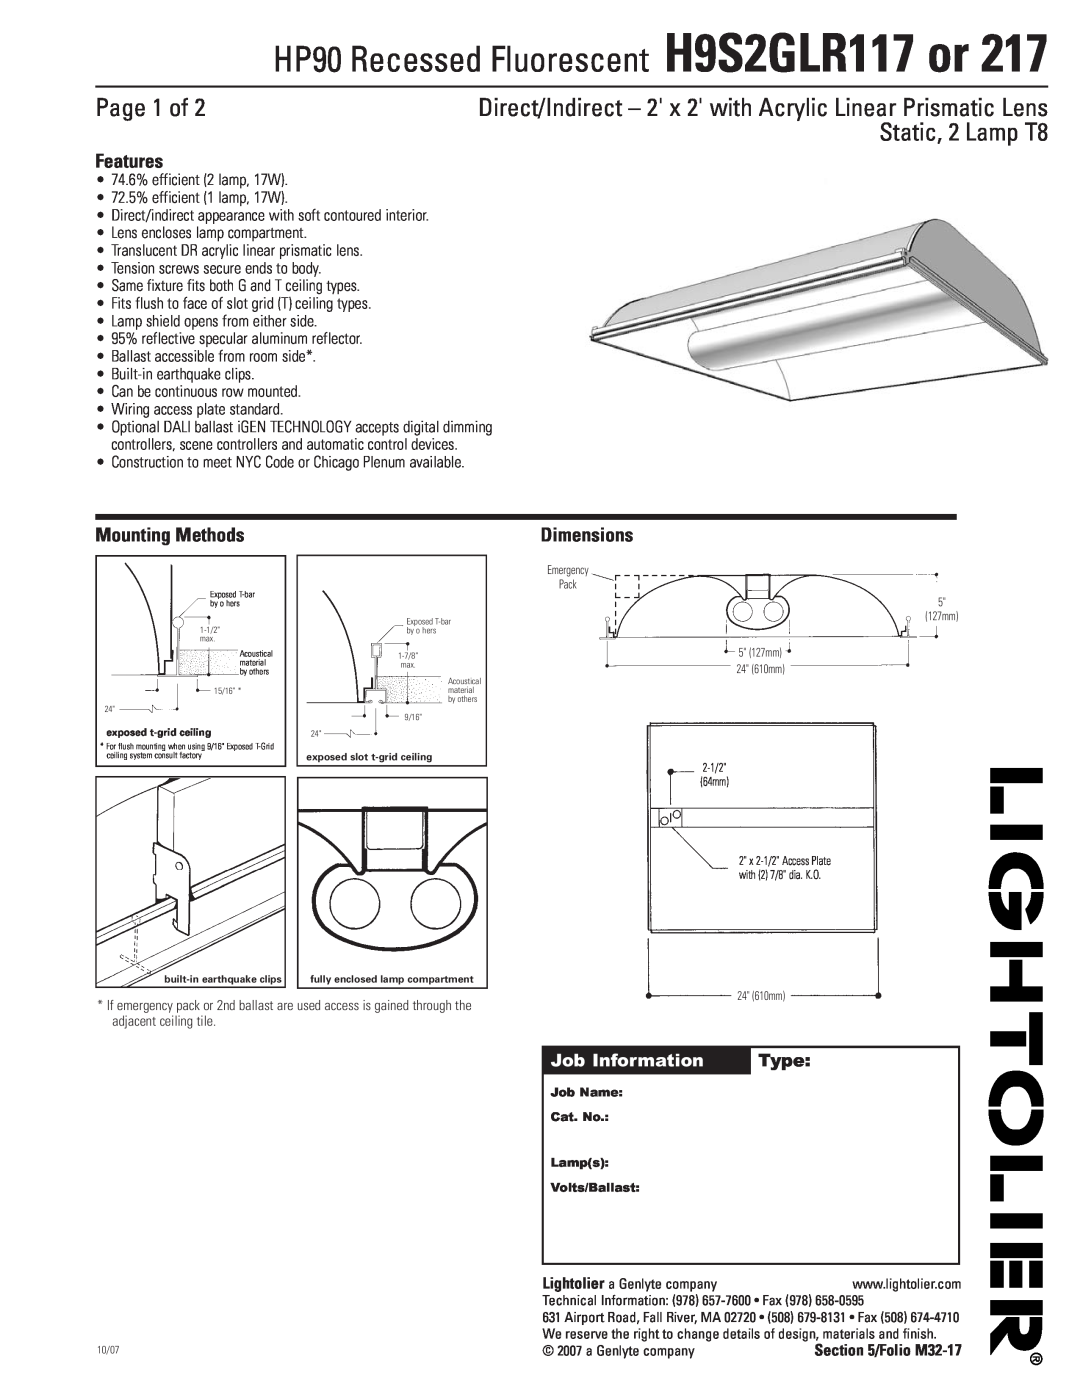 Lightolier dimensions HP90 Recessed Fluorescent H9S2GLR117 or, Page 1 of, Static, 2 Lamp T8, Features, Mounting Methods 